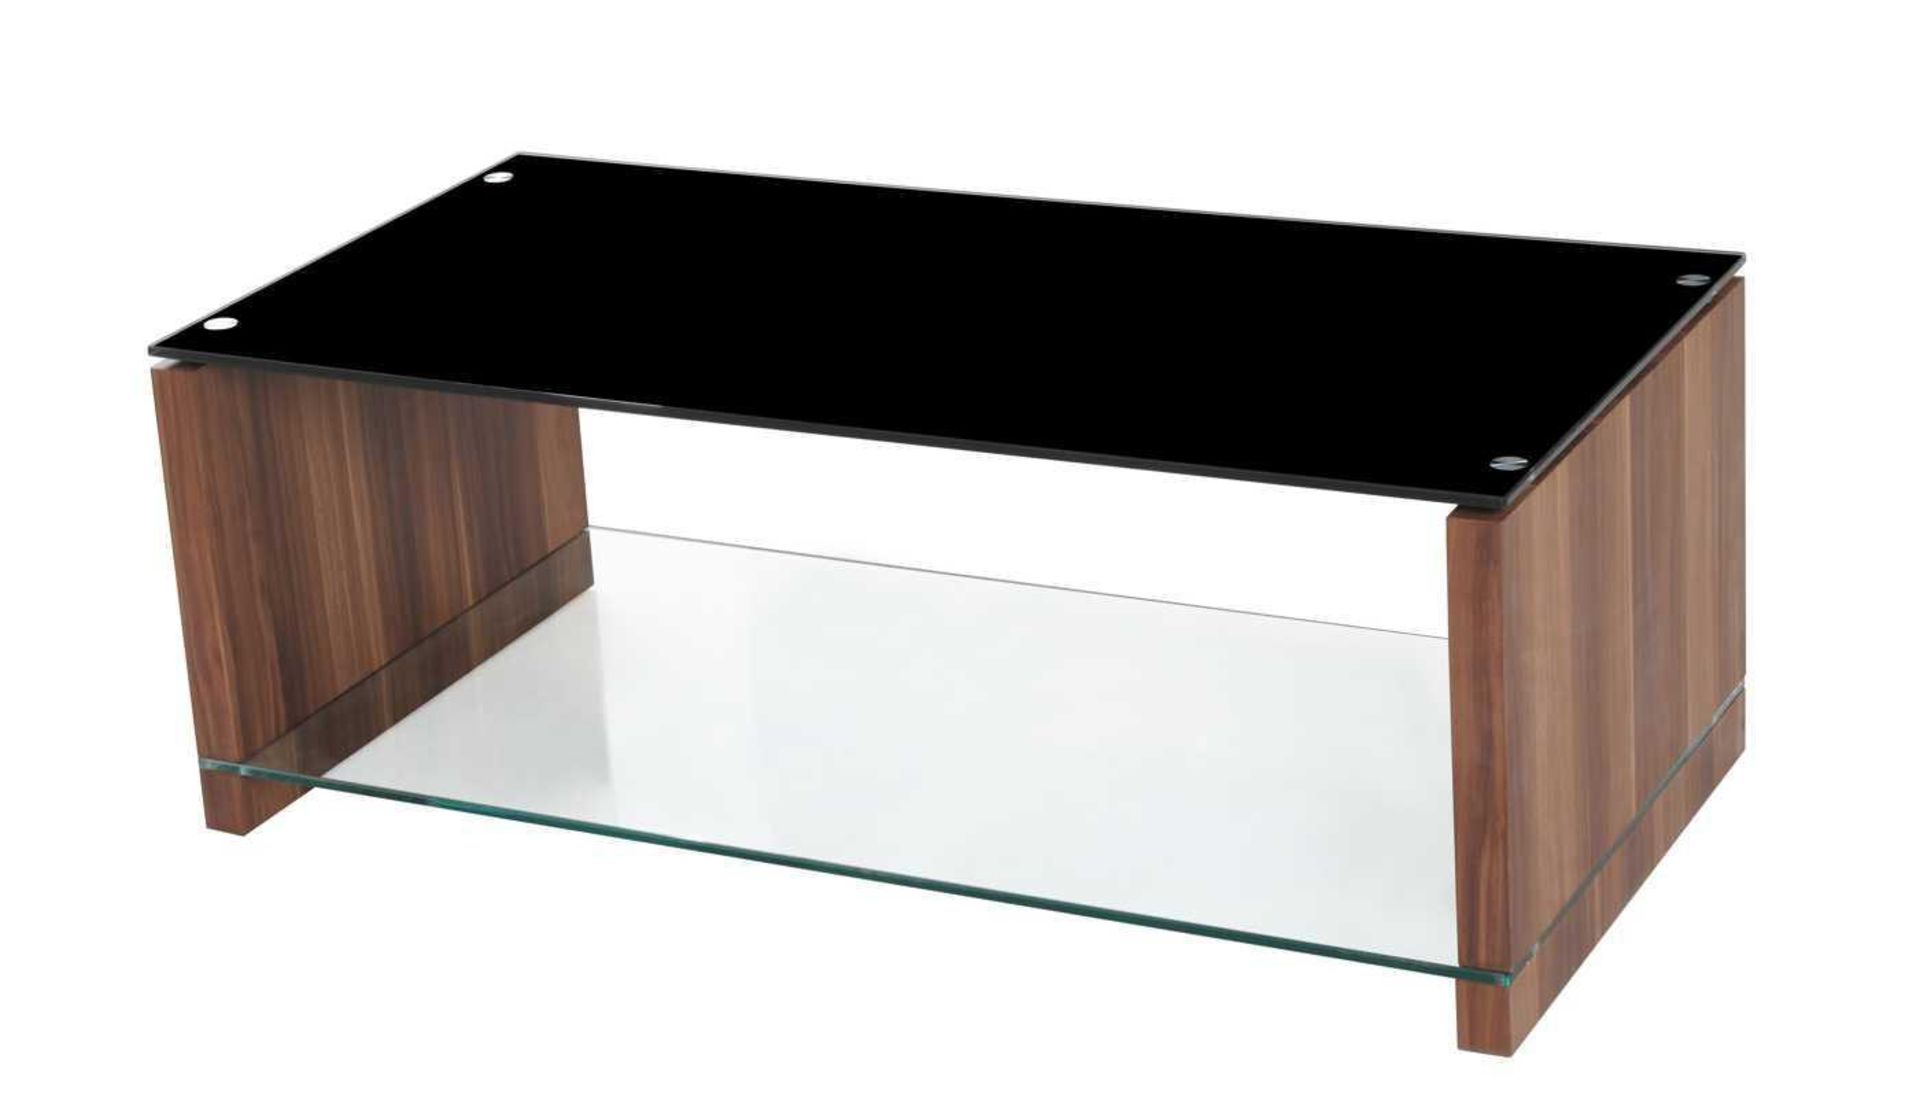 RRP £270 - Boxed 'Vision' Coffee Table In Walnut Finish With Clear Glass Top (Appraisals Available